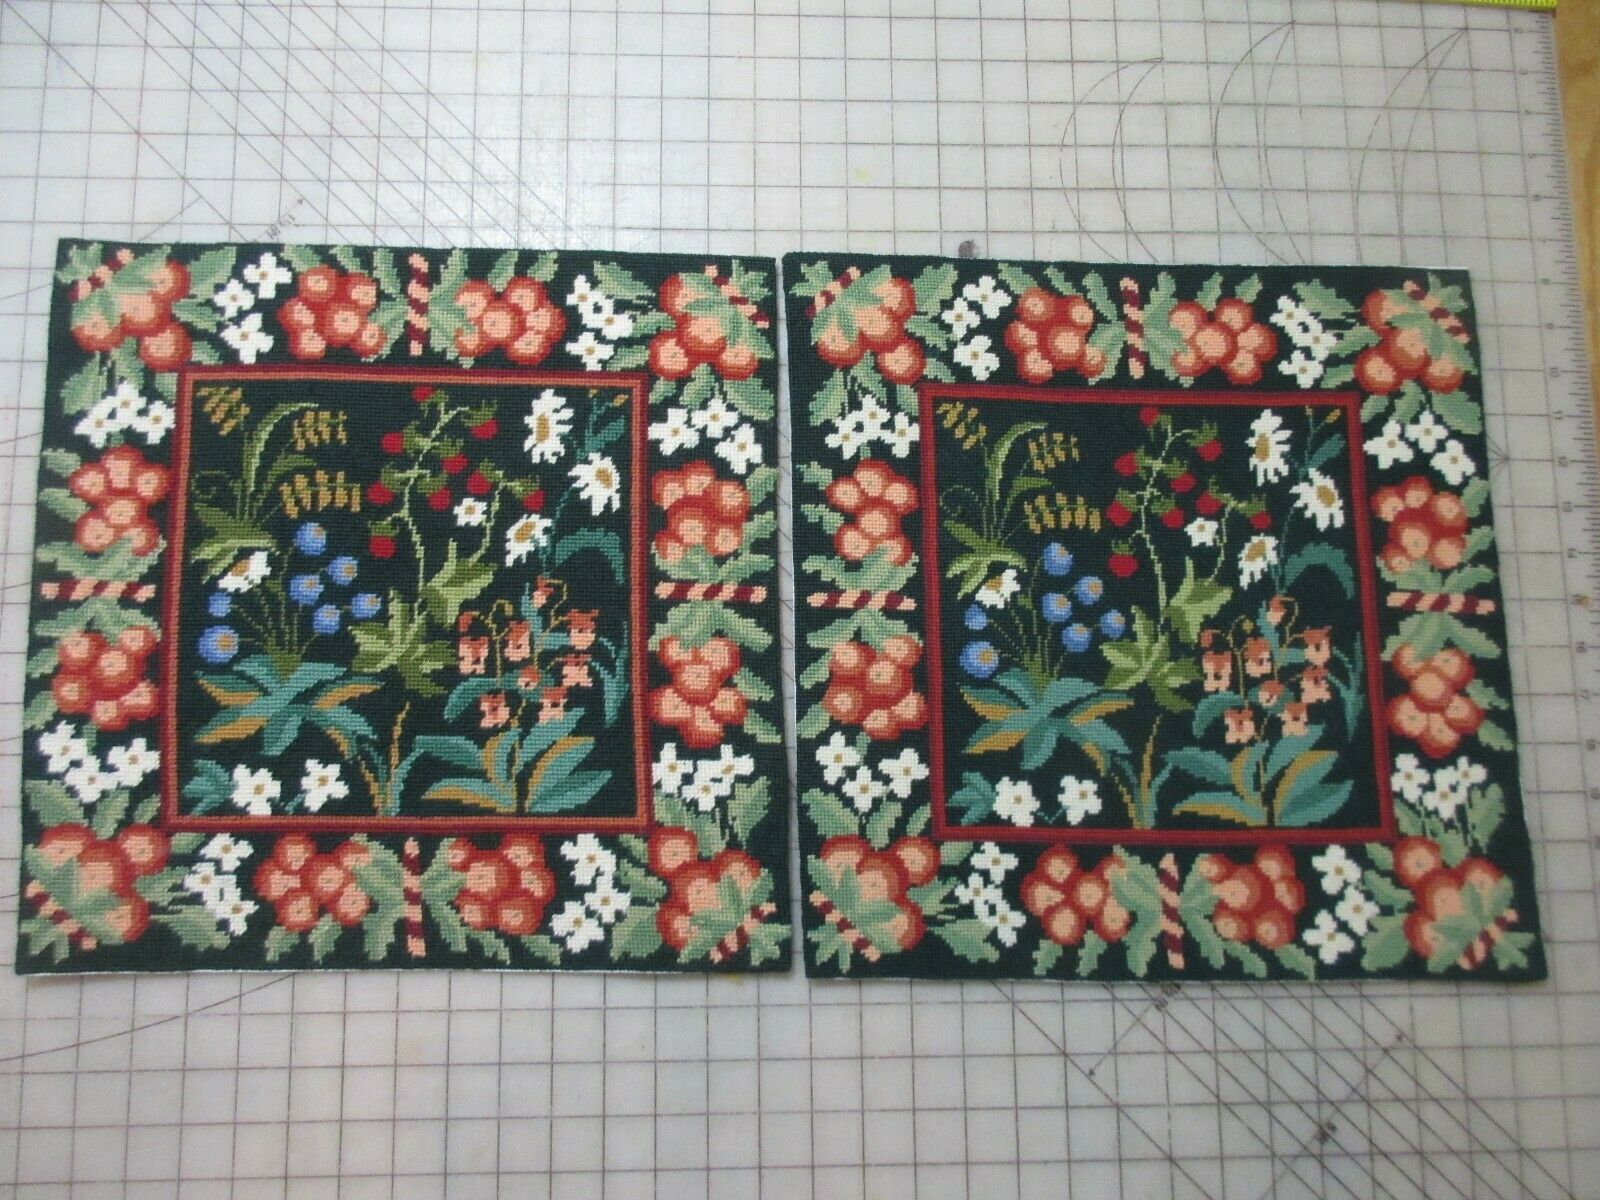 Needlepoint Stitching Complete Pair The Stitchery Julia Hickman Medieval Flowers